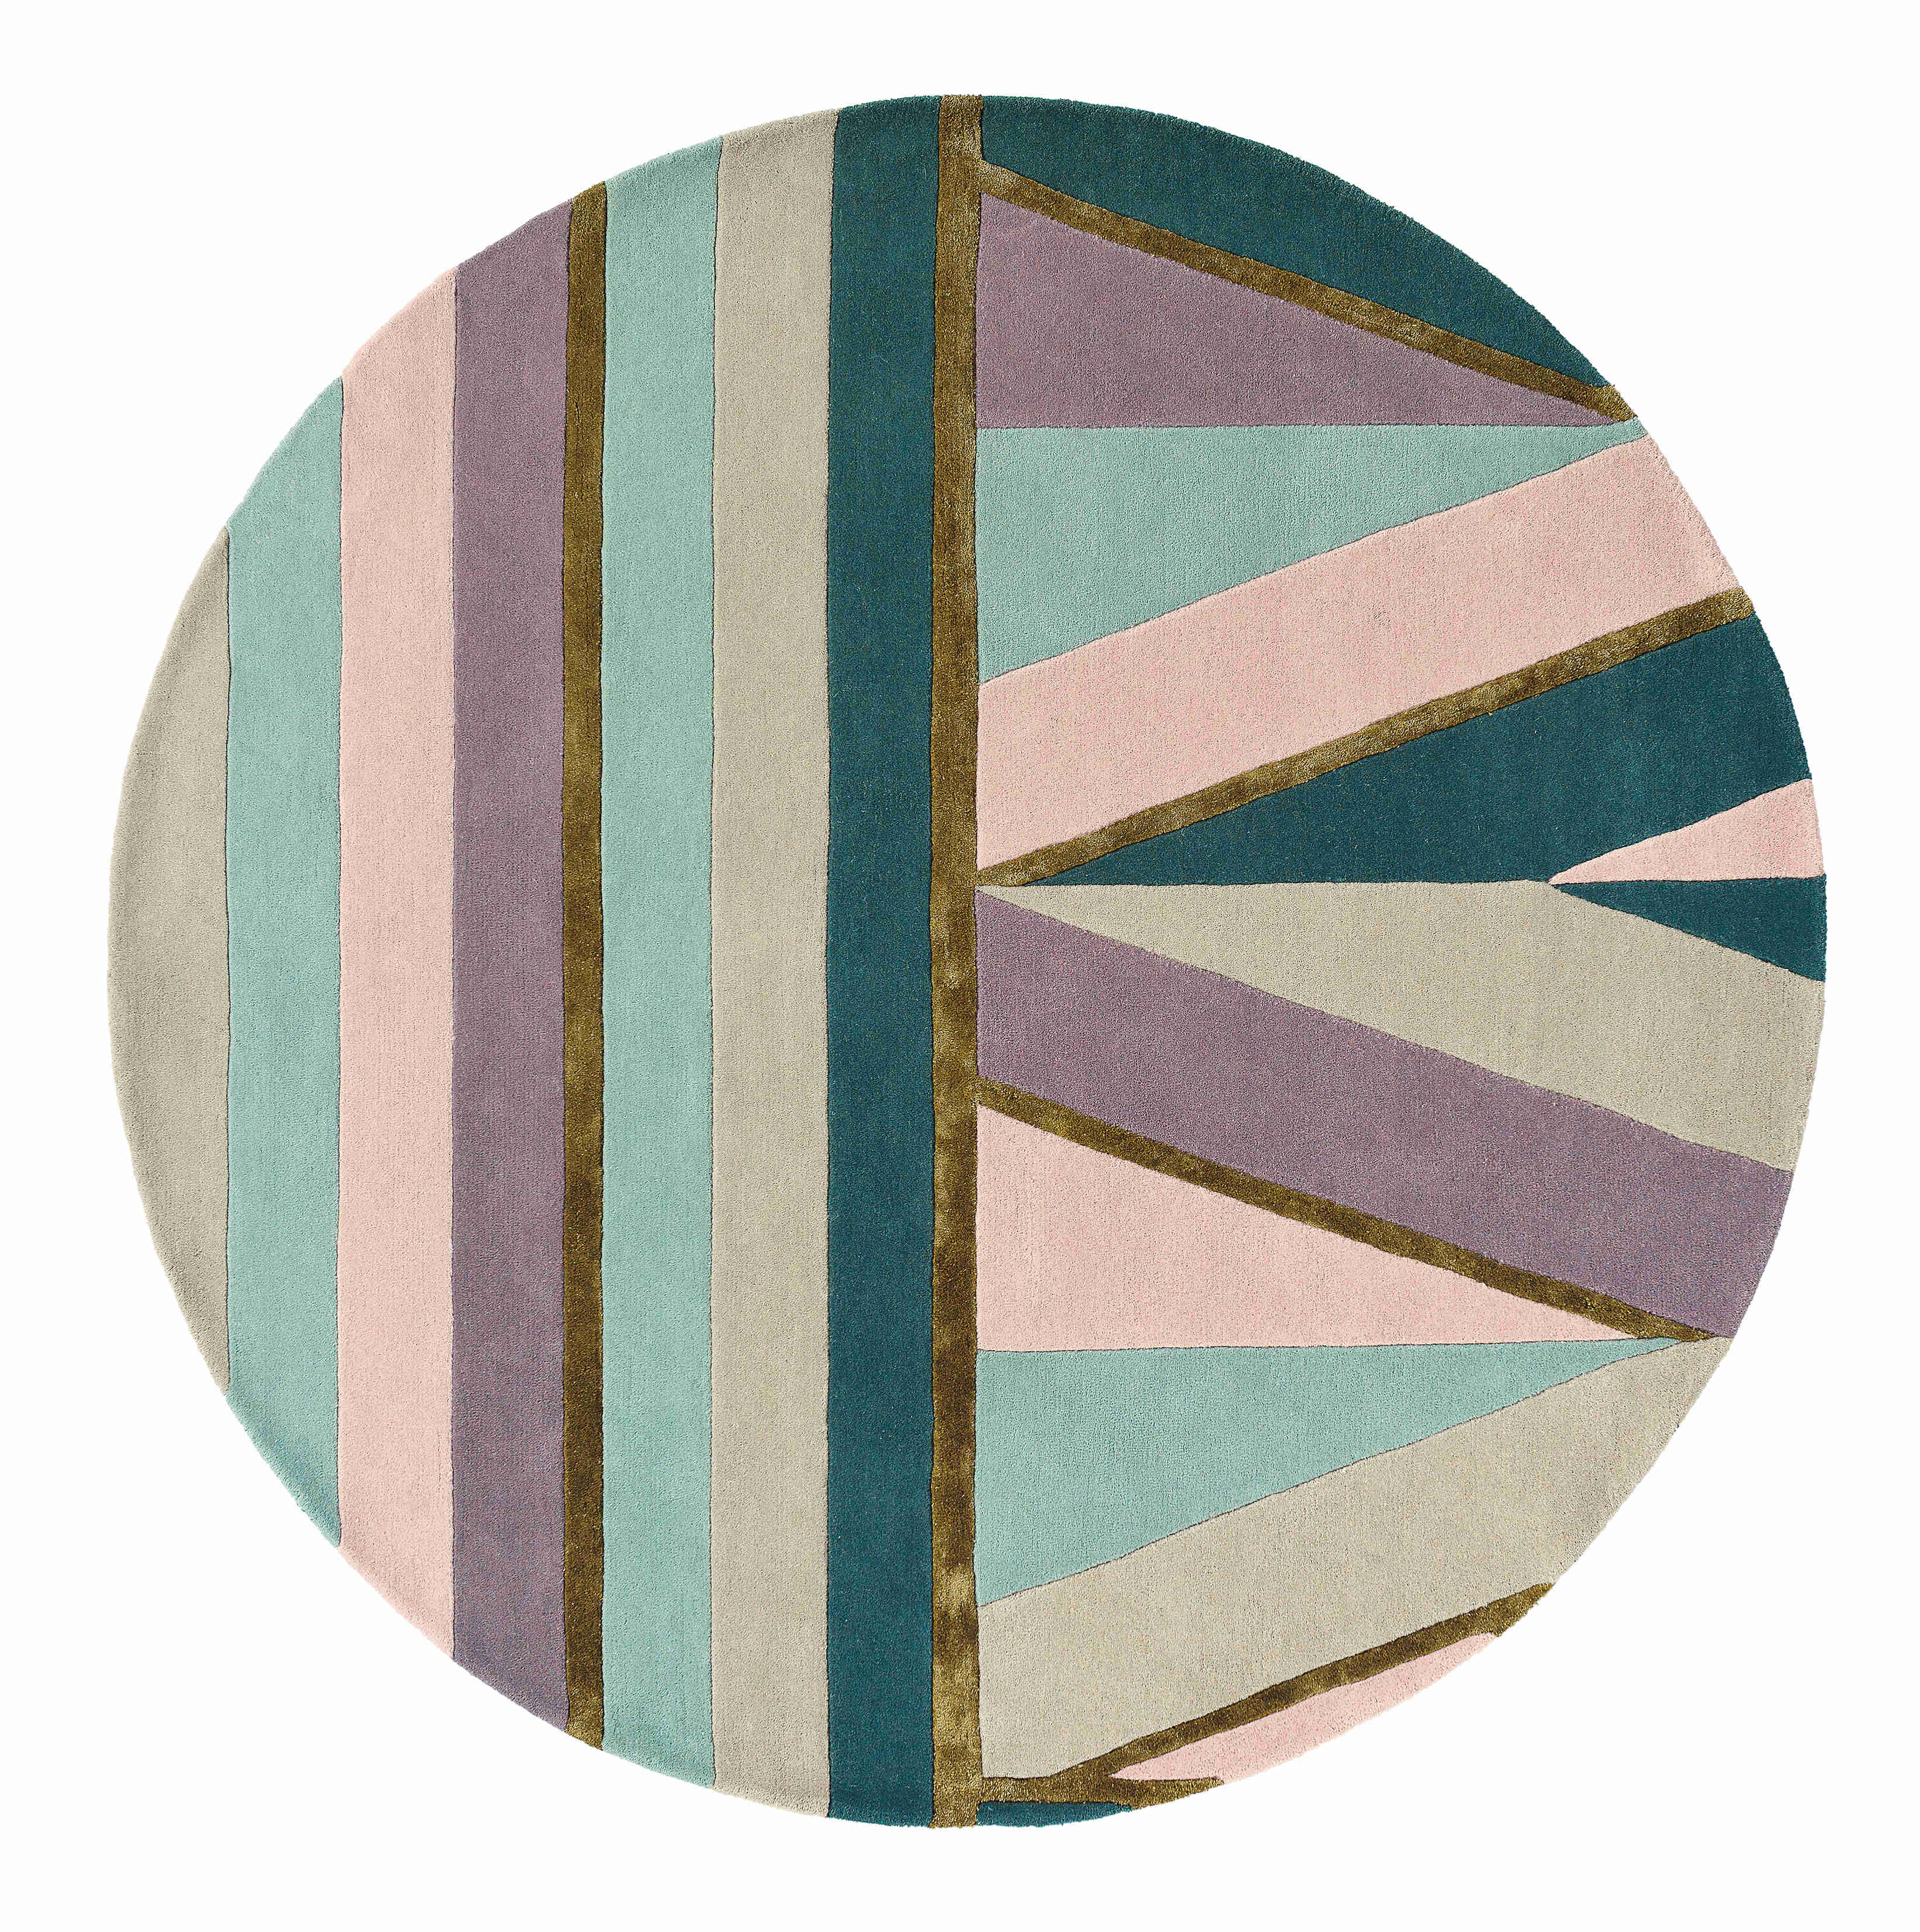 Round rug with geometric stripe pattern in green, teal, grey and purple. Gold details.